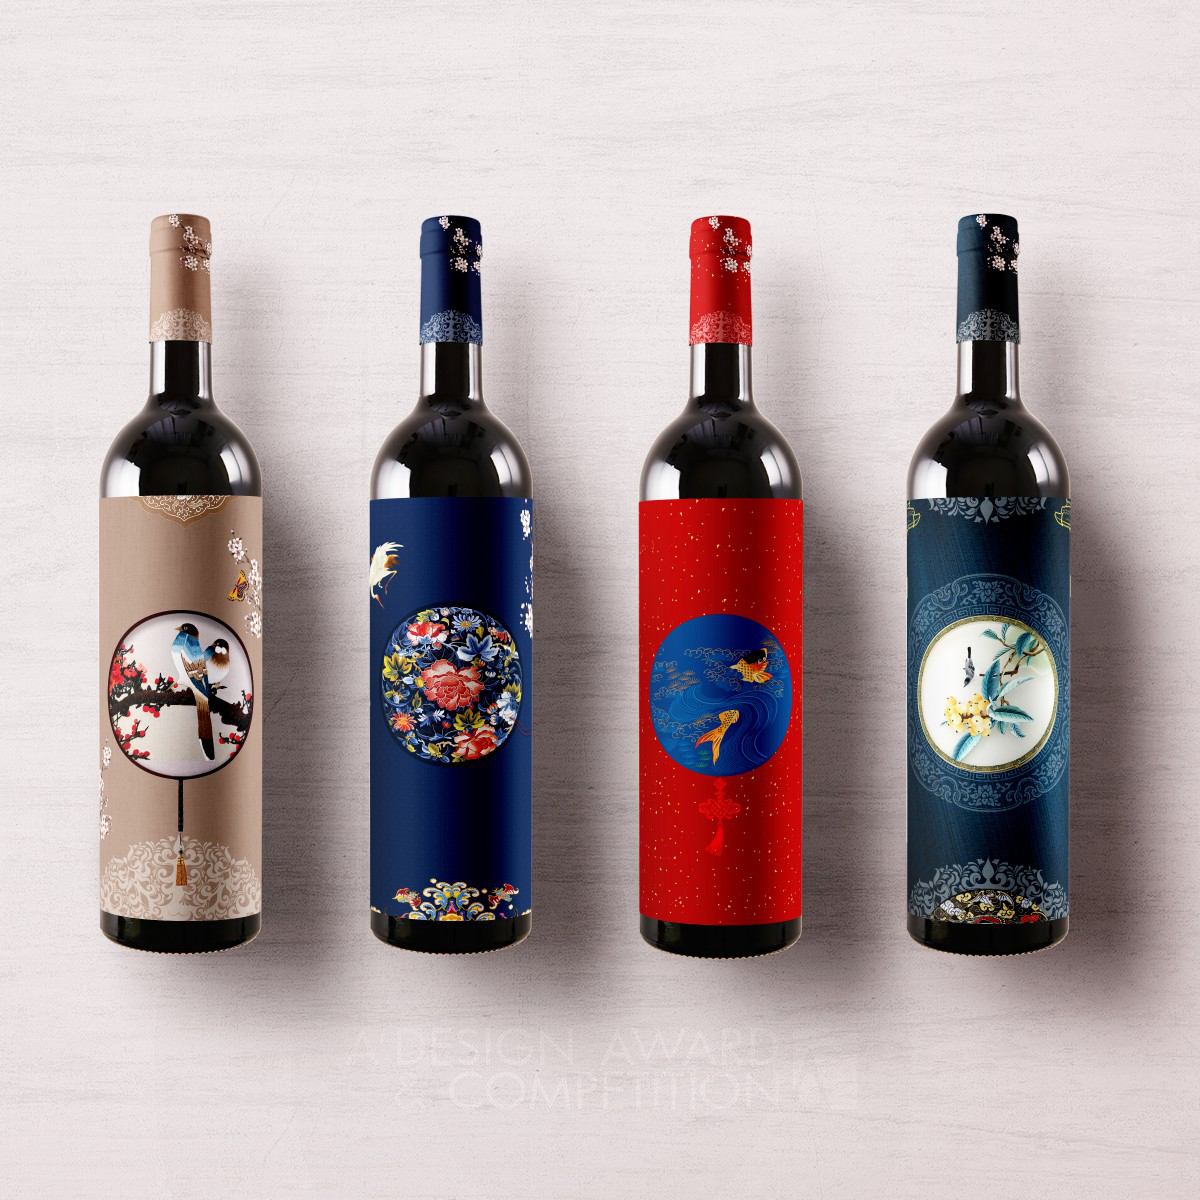 Imperial Palaces Wine packaging by Min Lu